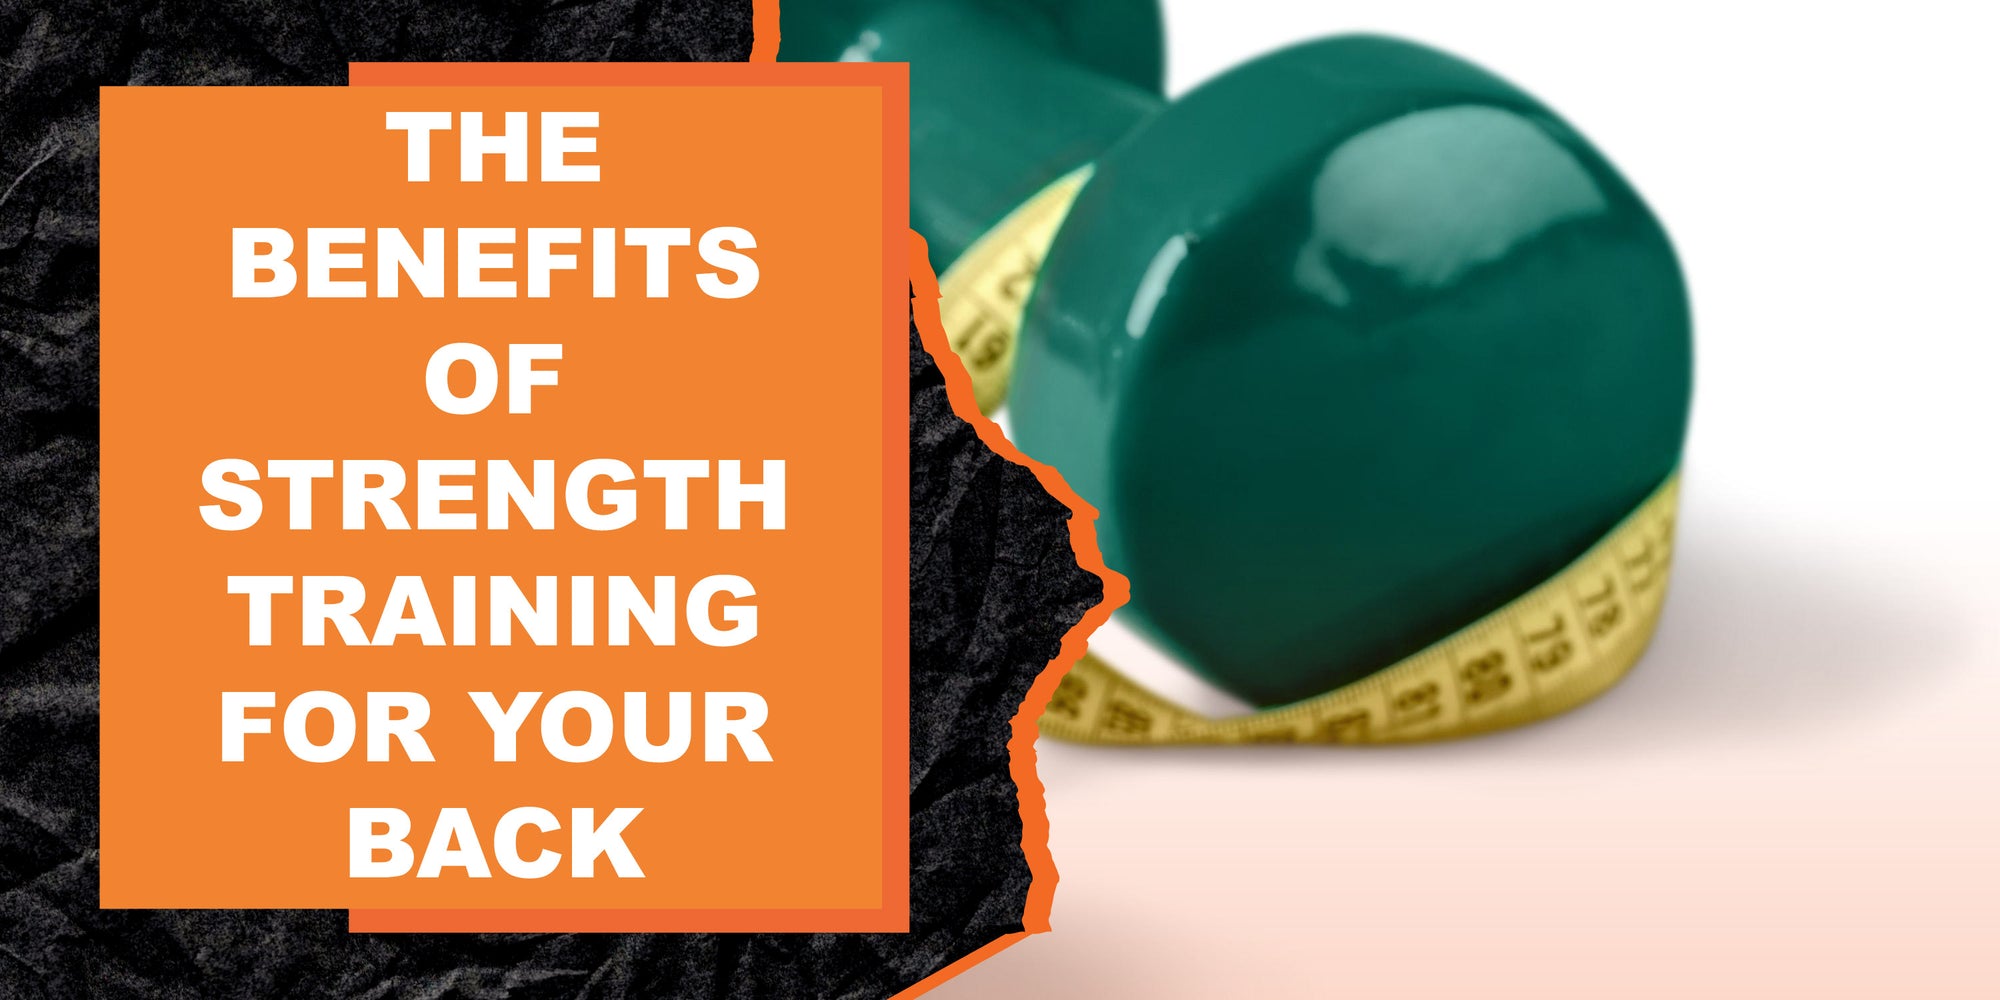 The Benefits of Strength Training for Your Back